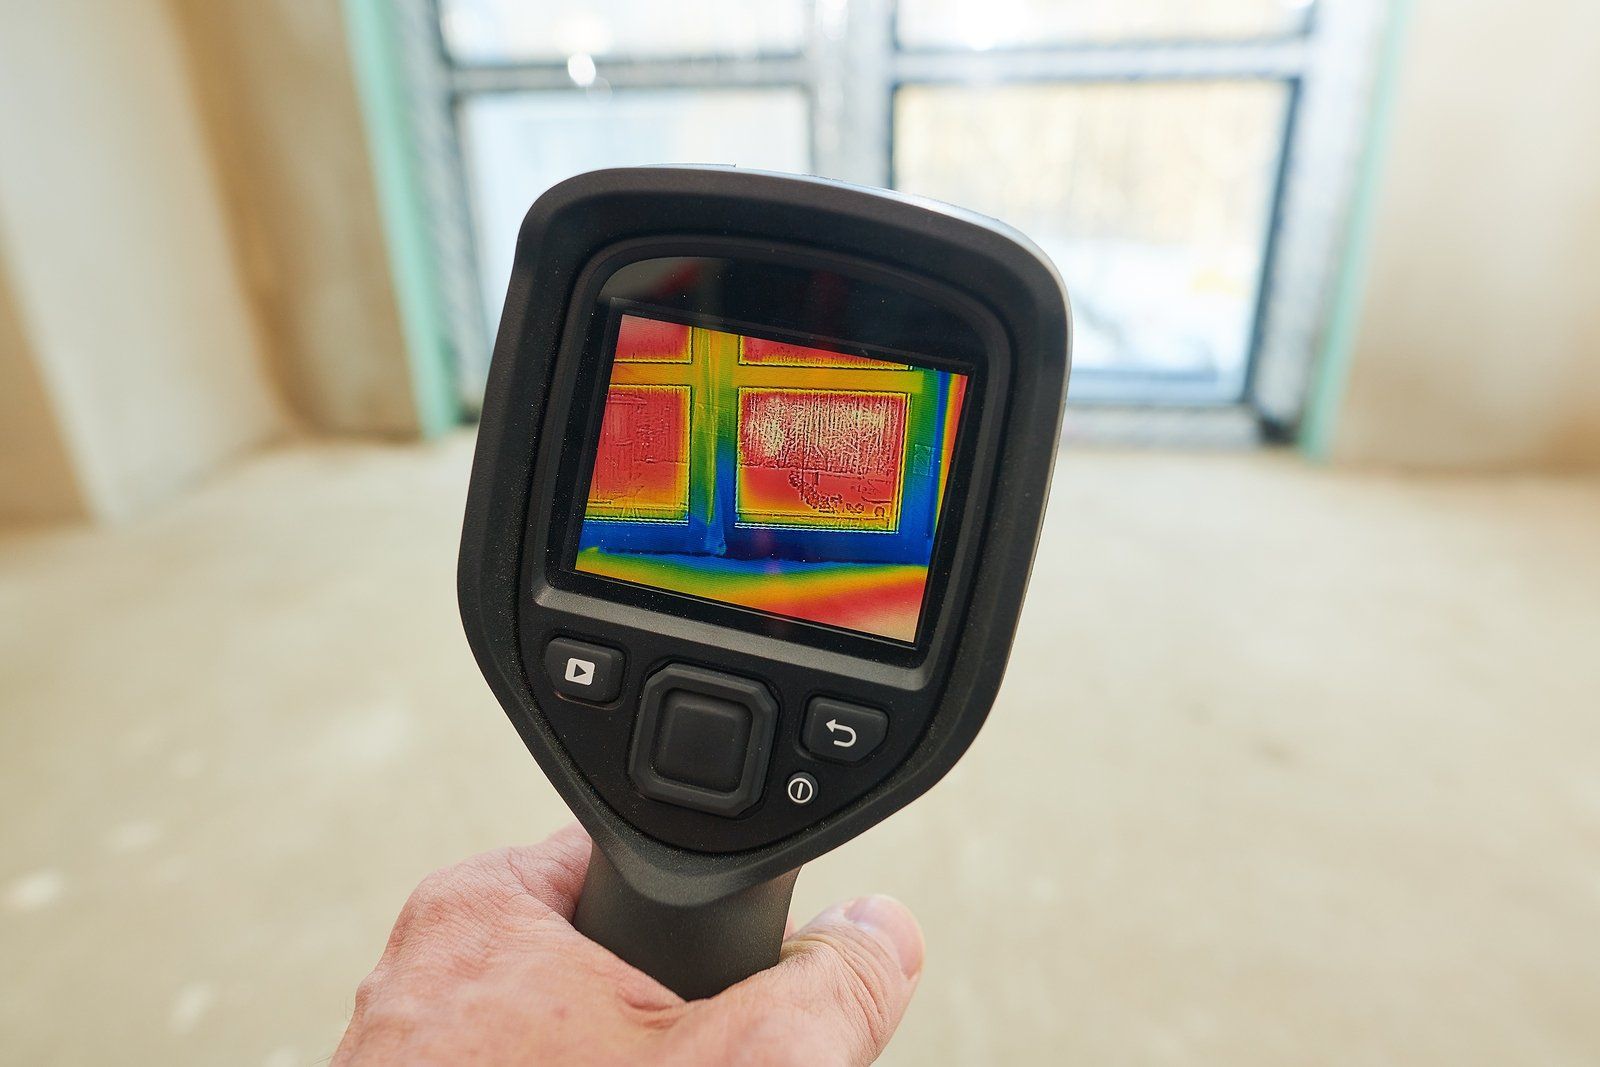 Thermal imaging equipment used during a pre-purchasing home inspection